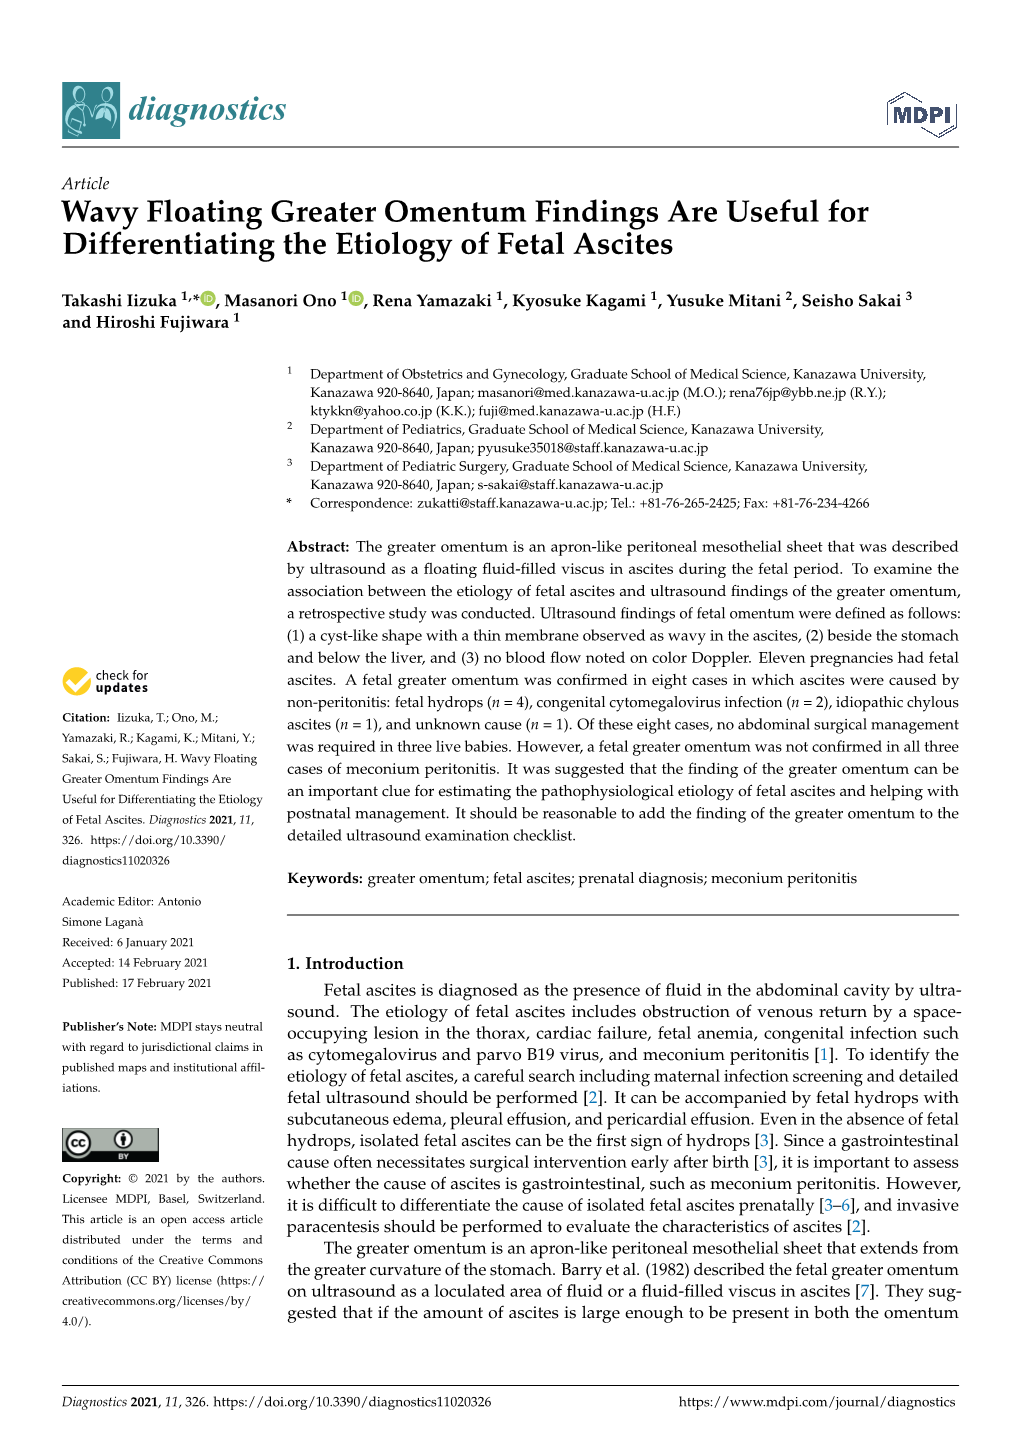 Wavy Floating Greater Omentum Findings Are Useful for Differentiating the Etiology of Fetal Ascites